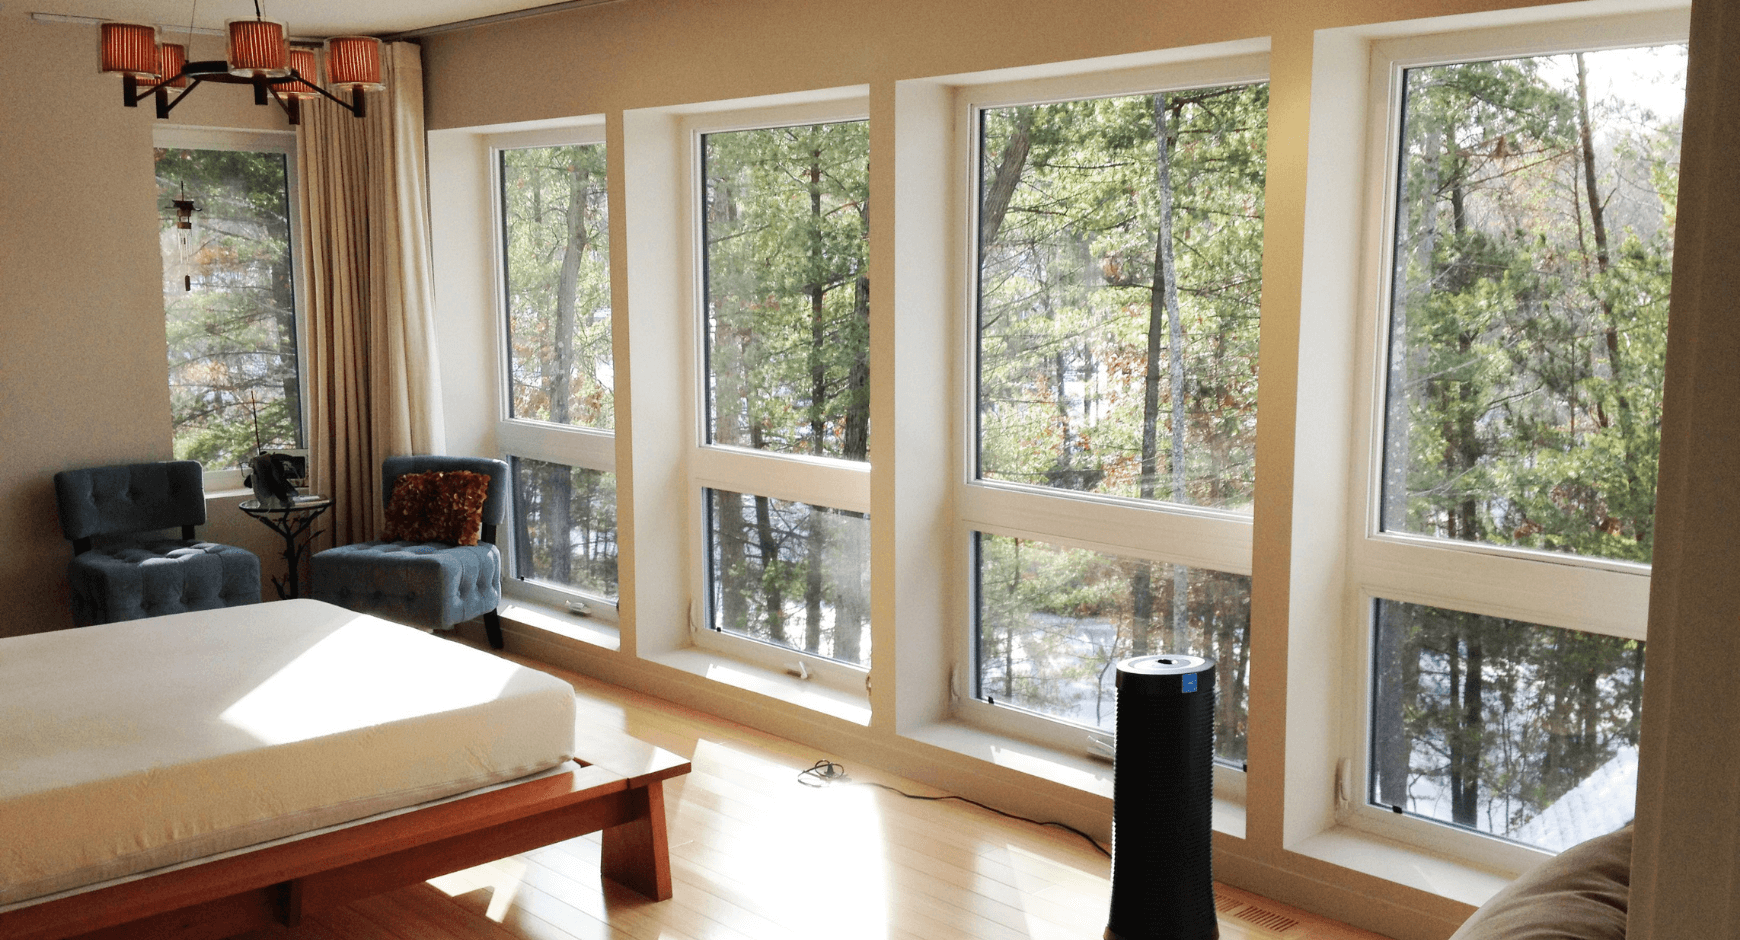 Image of a home with large windows looking out into the woods